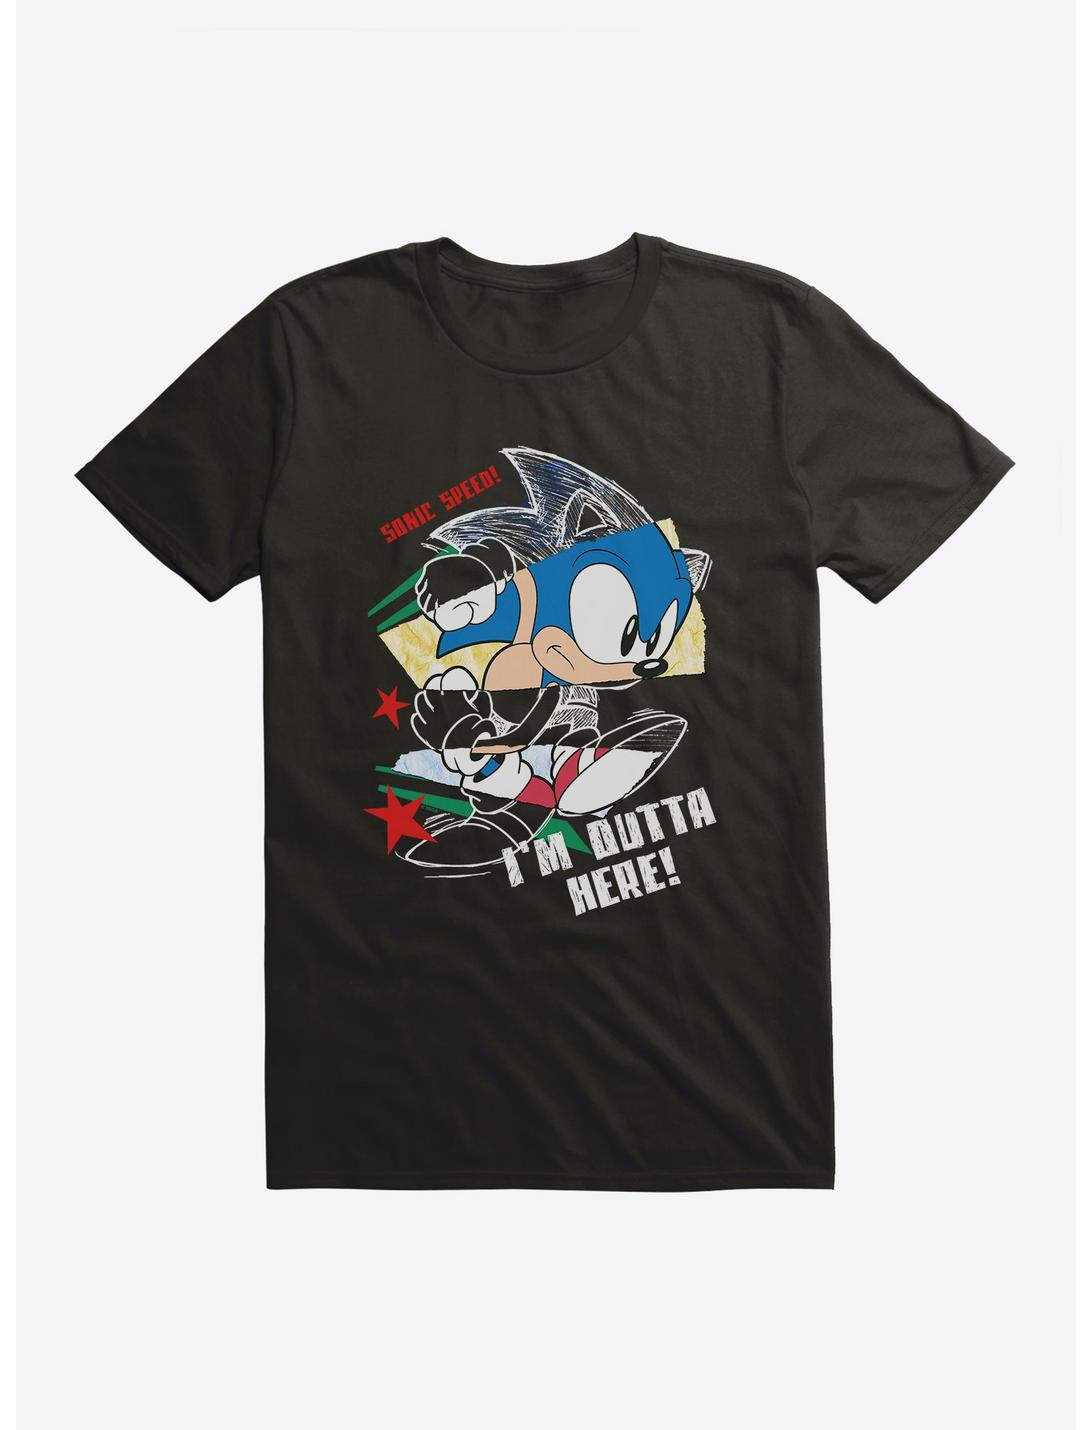 Sonic The Hedgehog I'm Outta Here! Drawing T-Shirt, BLACK, hi-res